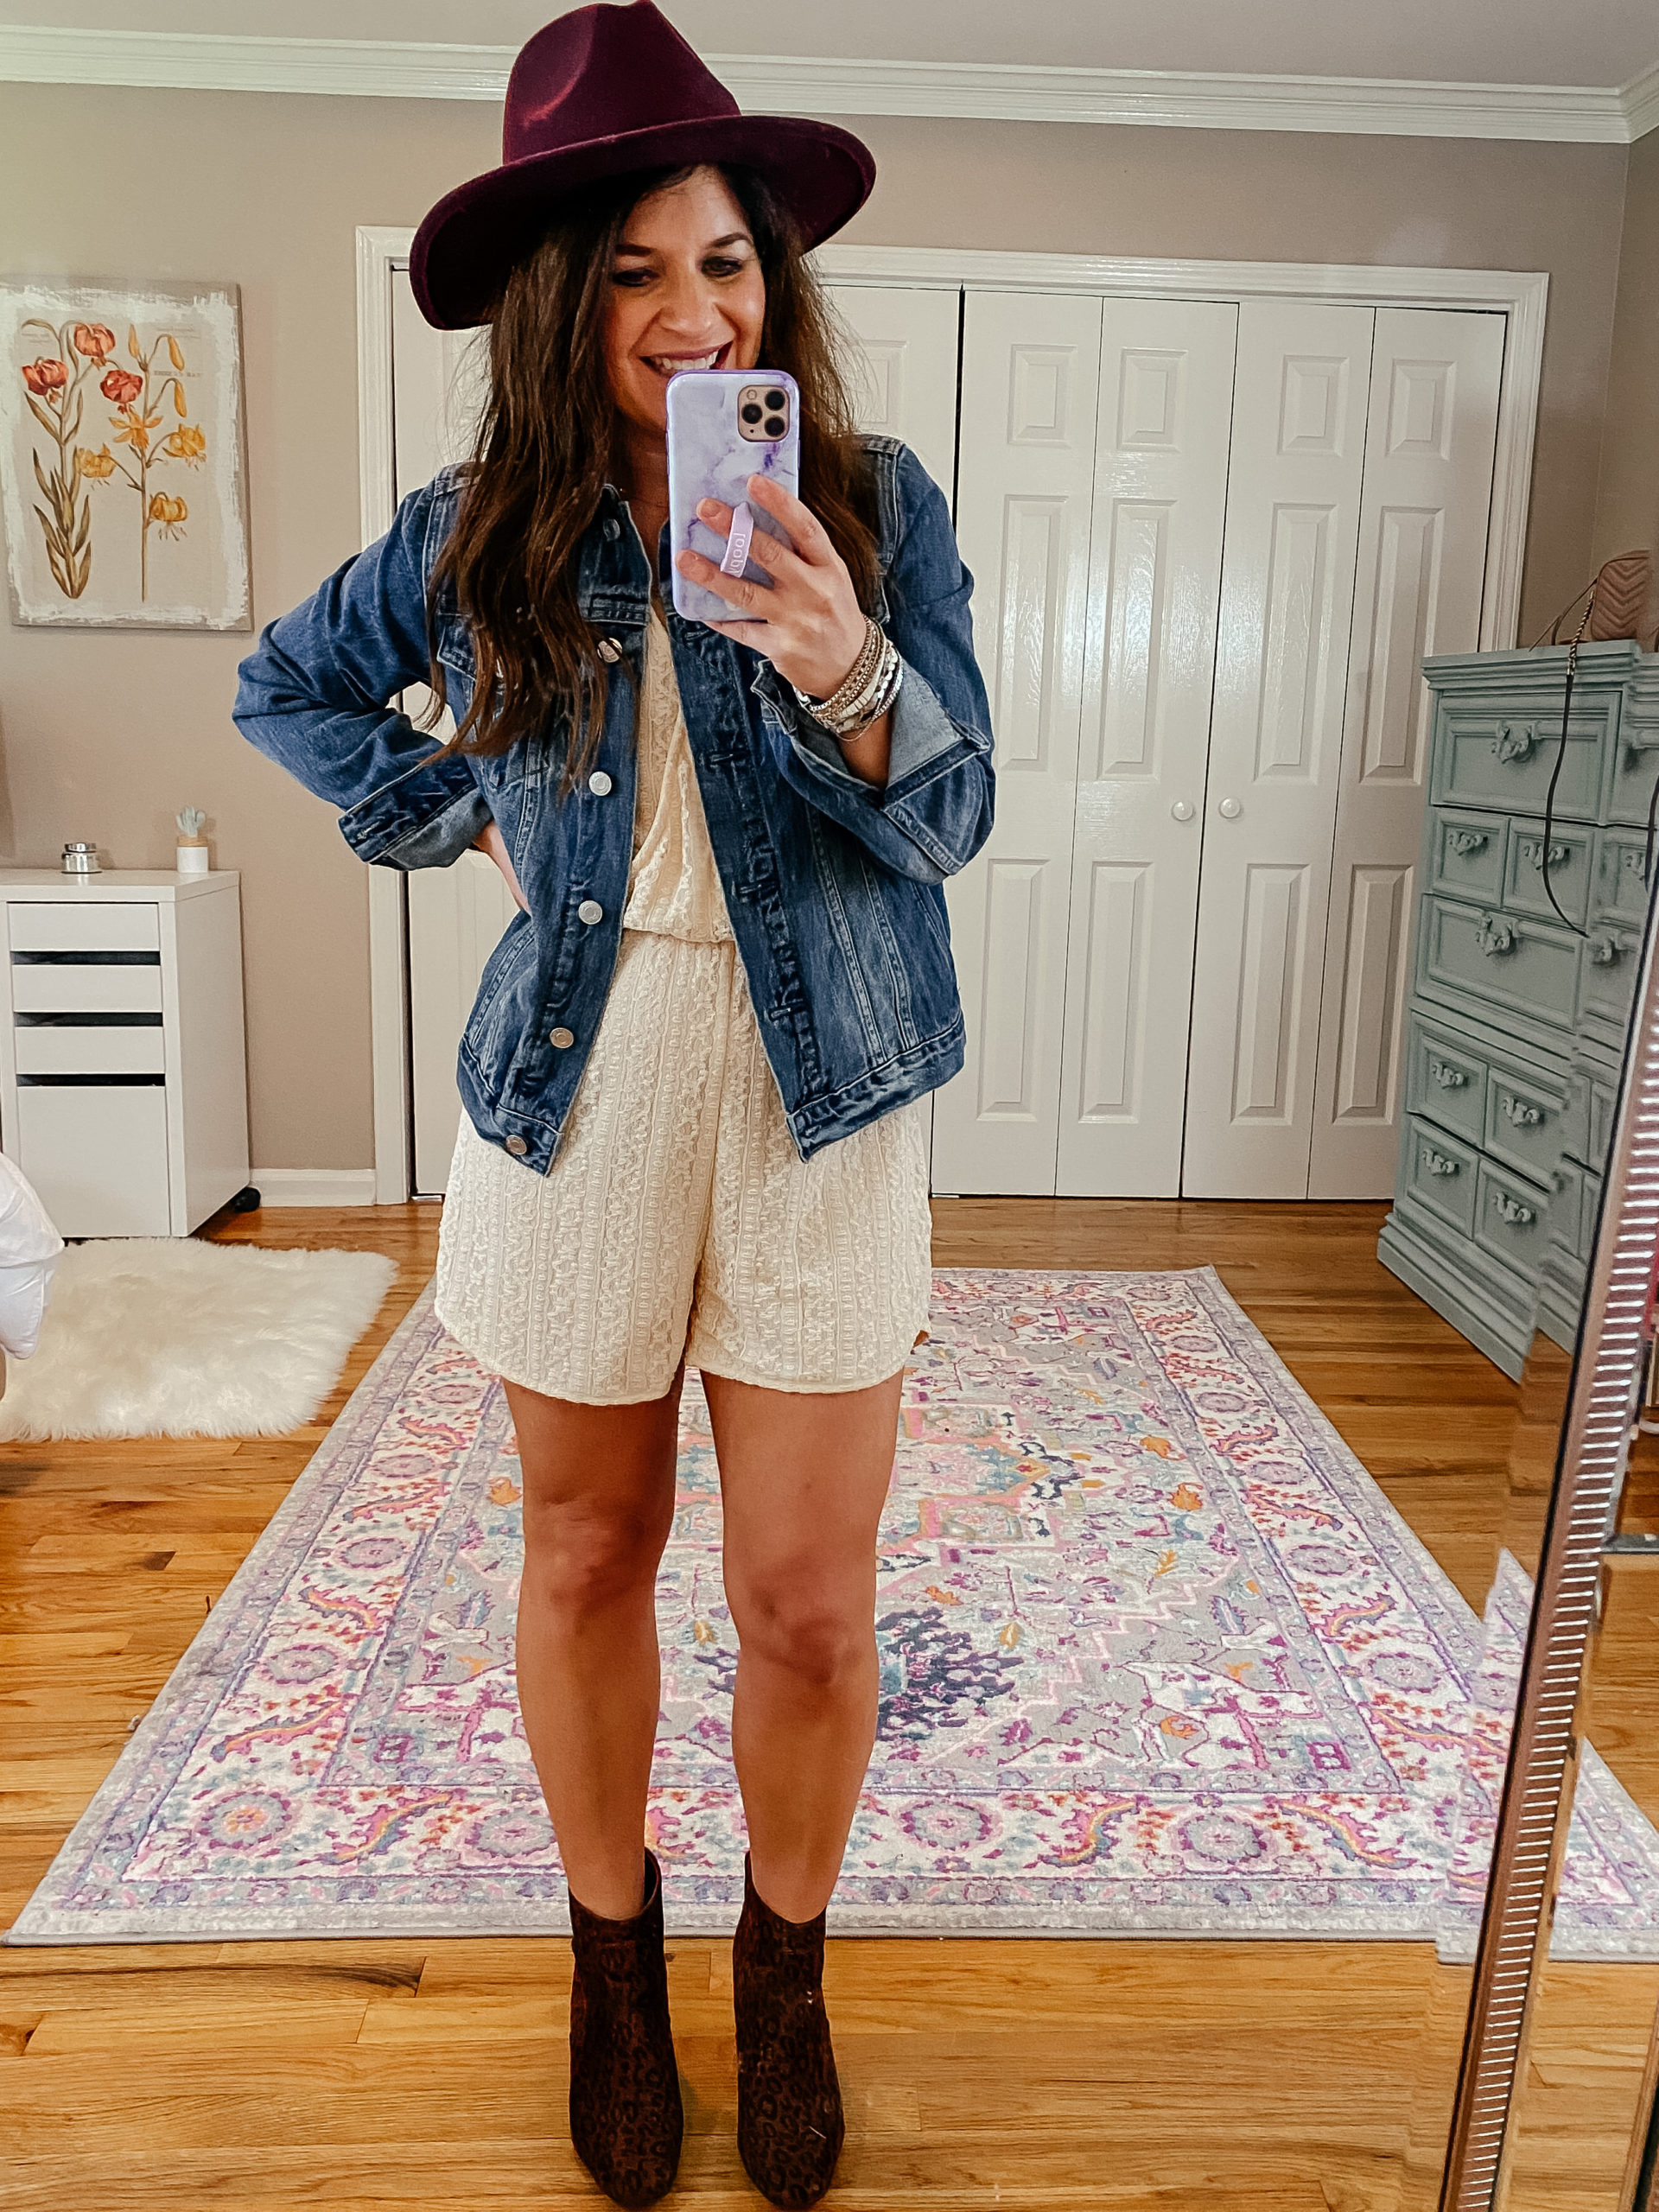 4 Easy Way to Transition a Romper into Fall - Addicted To 2 Day Shipping